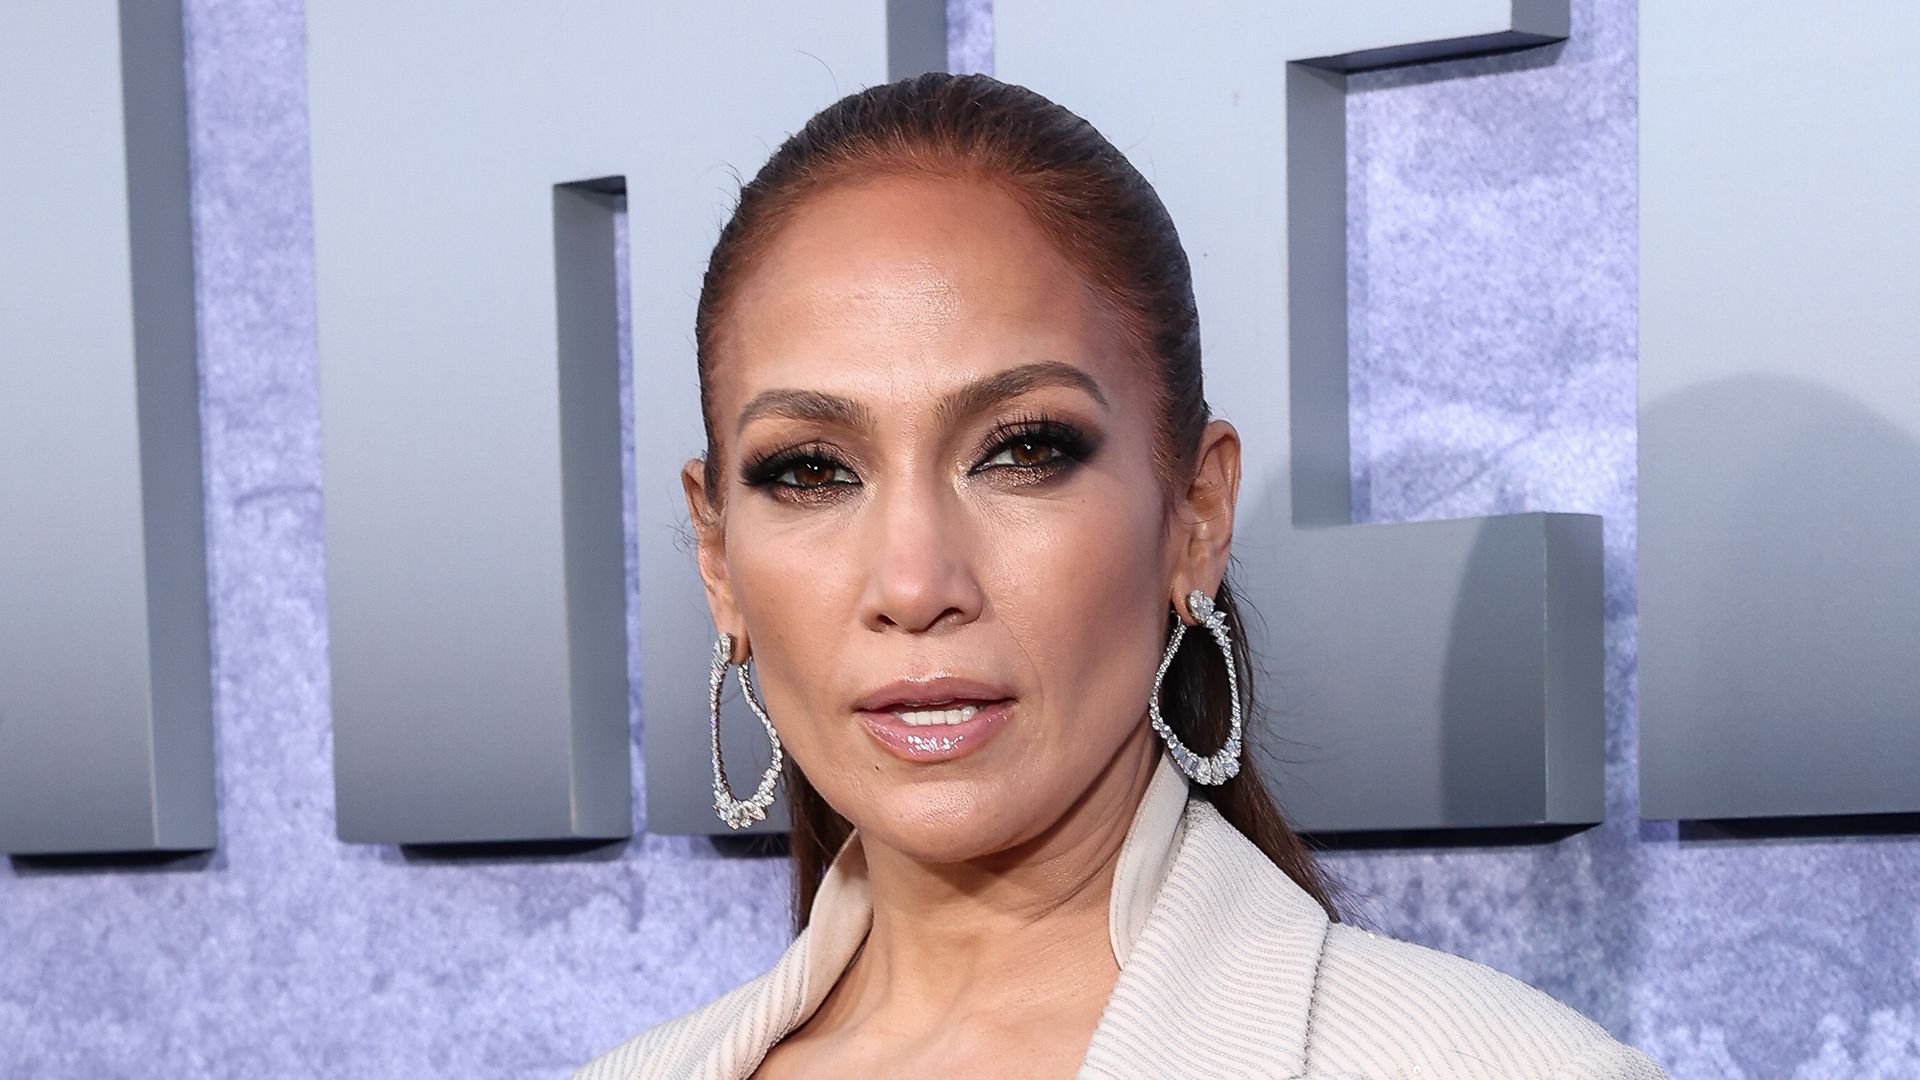 Jennifer Lopez at the premiere of "The Mother" wearing a blazer and a bra underneath 